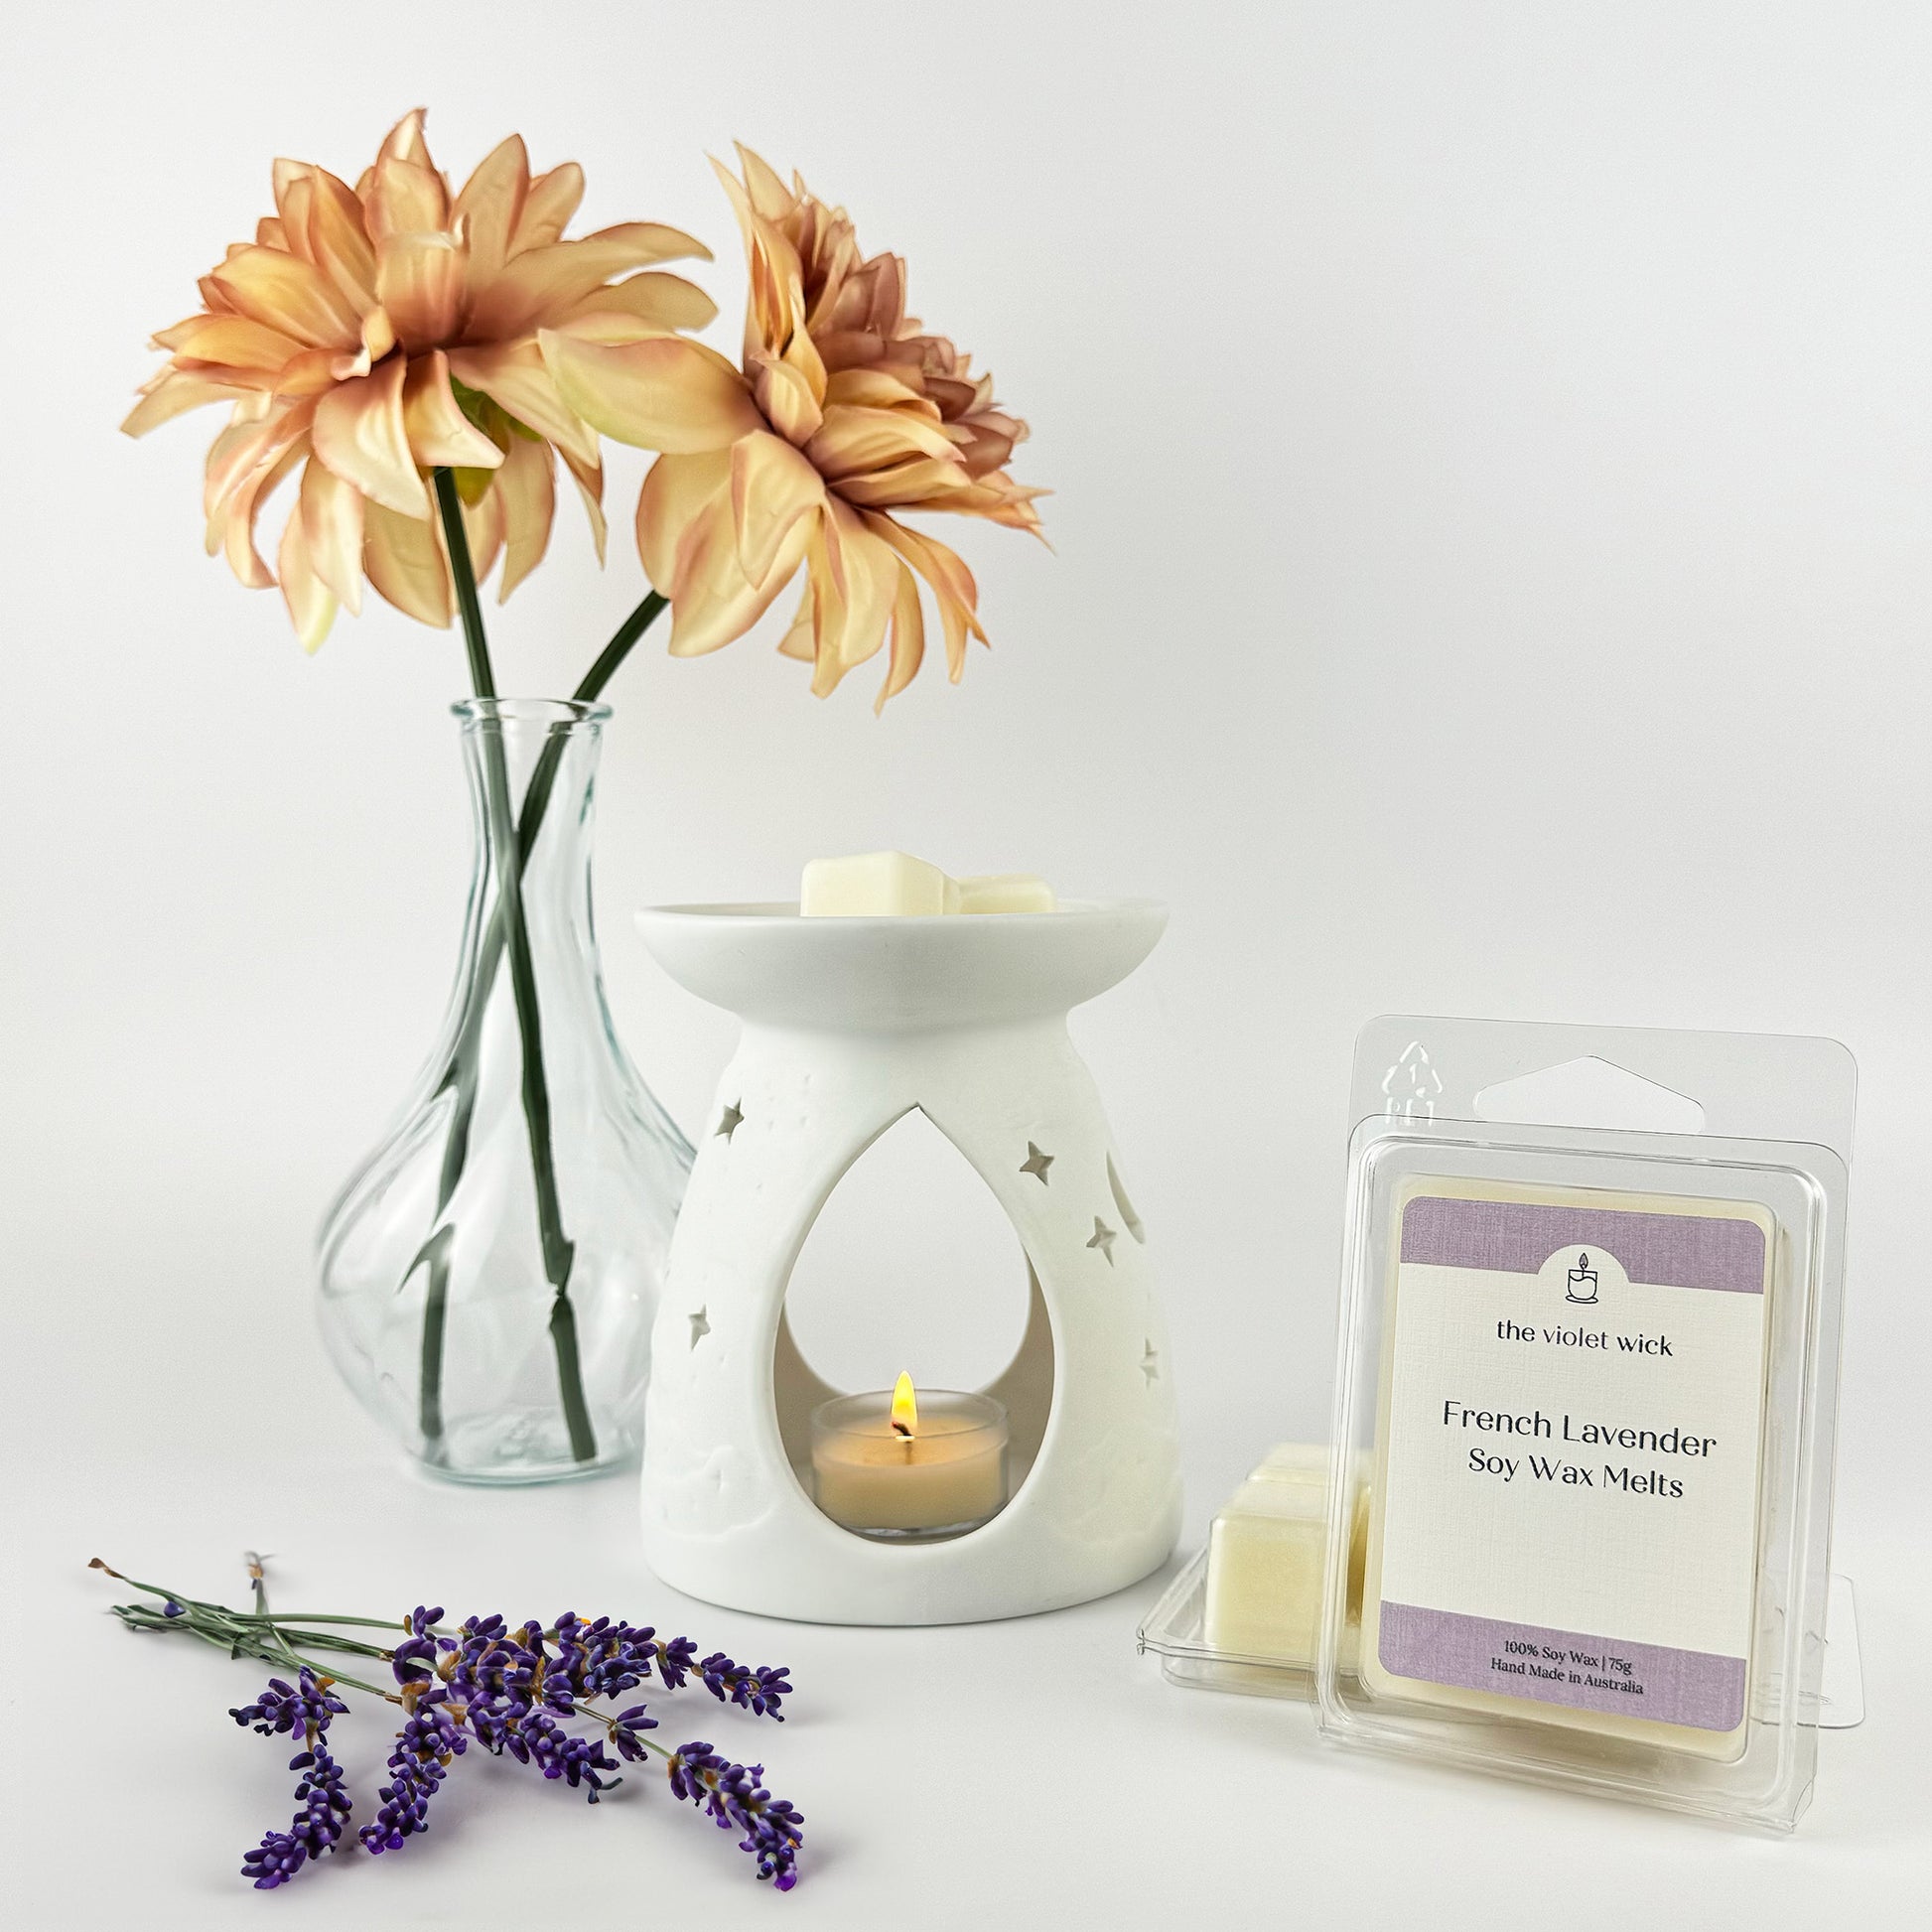 French Lavender Soy Wax Melt